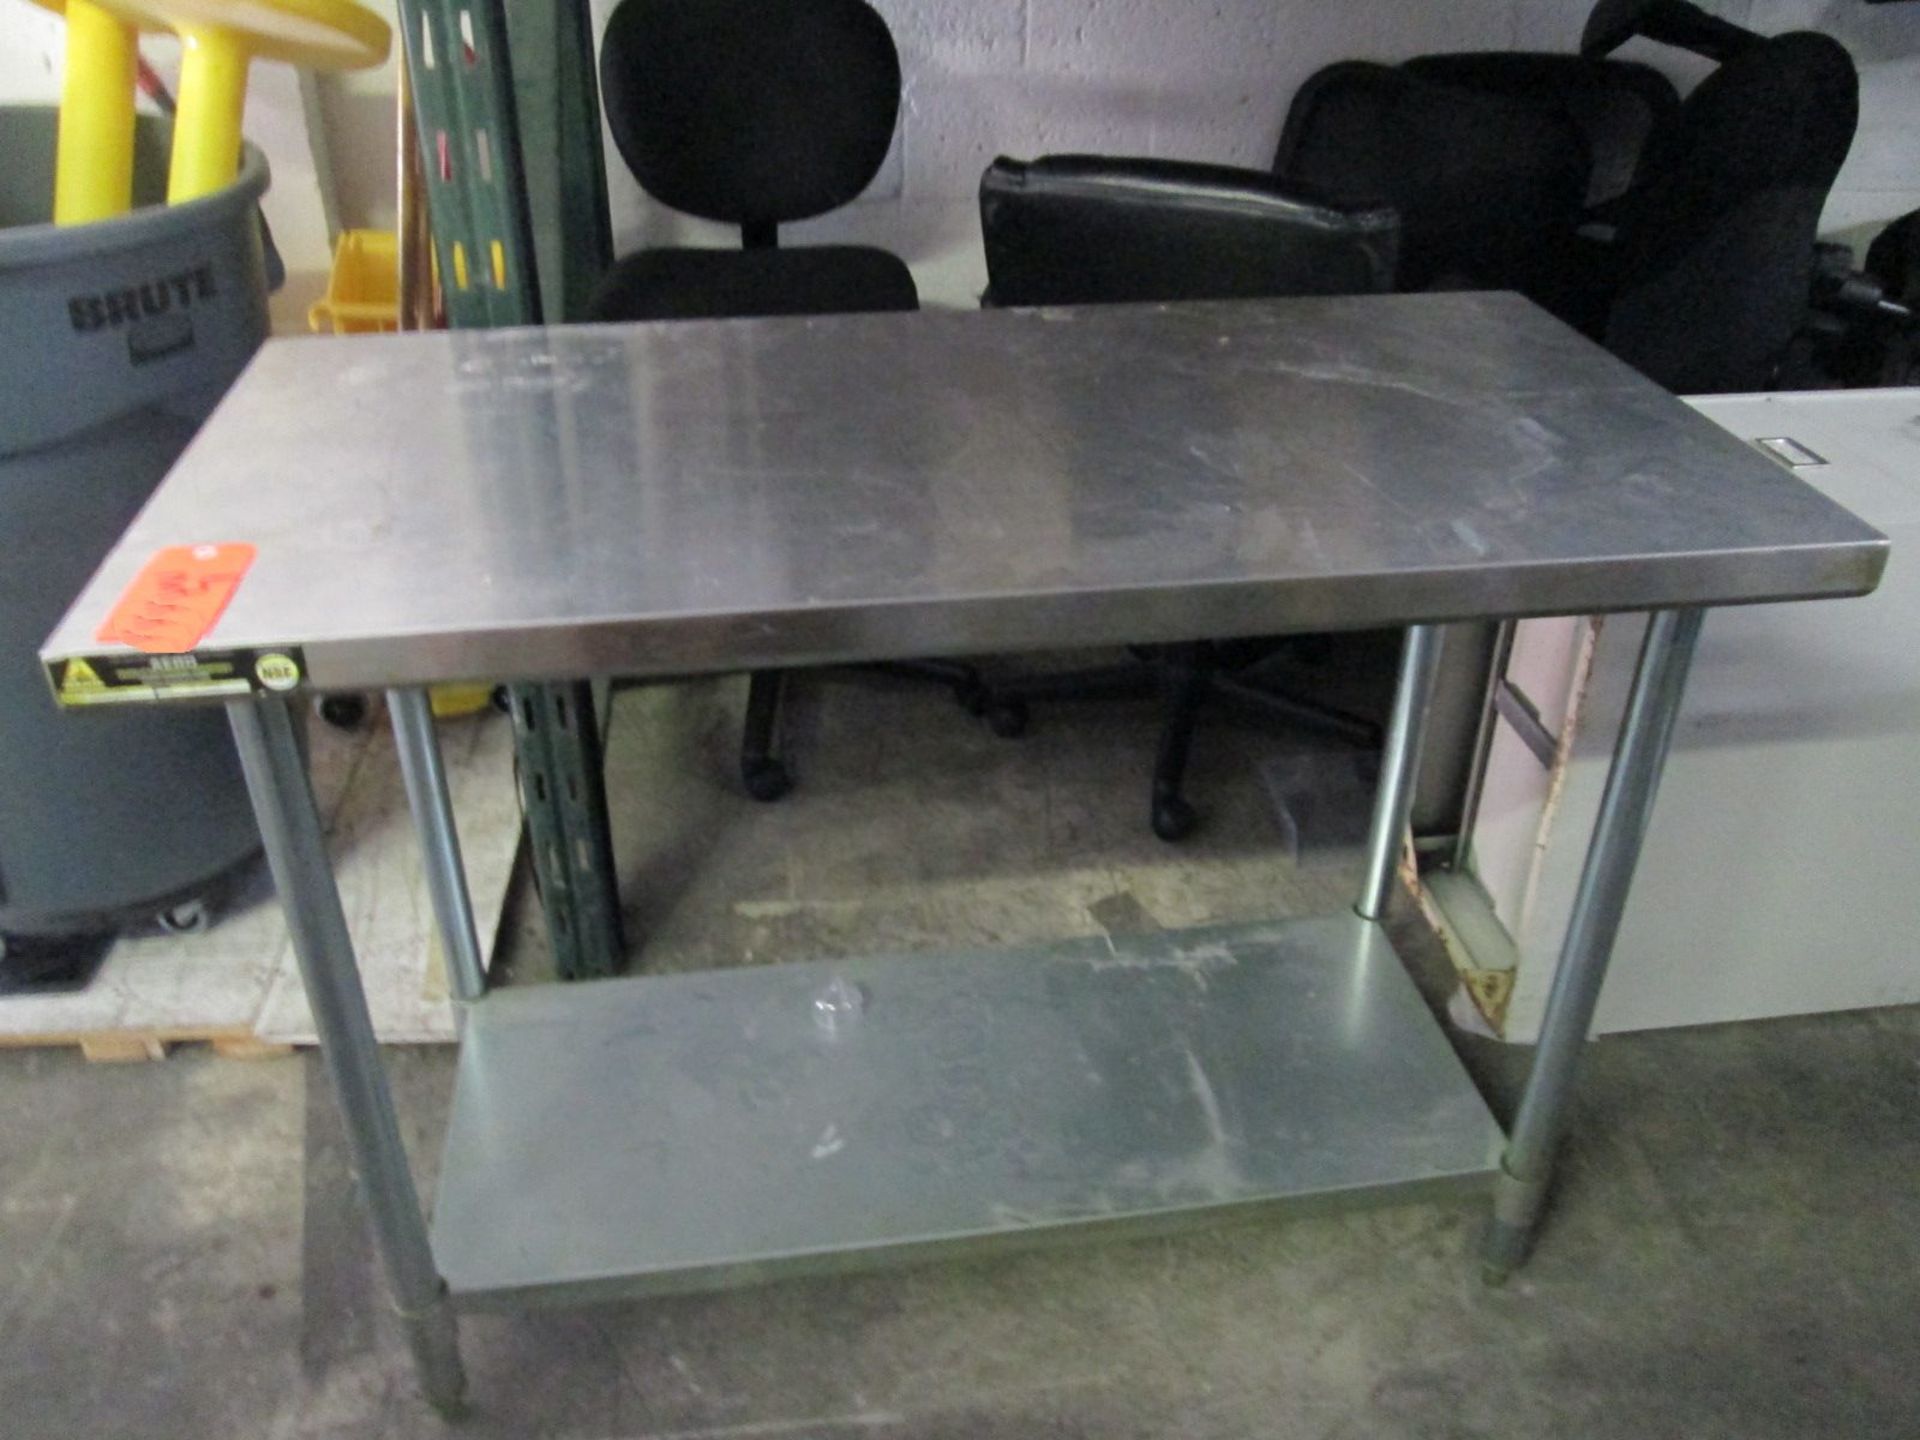 Stainless Steel Table, 24" x 48" x 34" high, 2 Tiers, Mfg by Aero Mfg Model AI-2448